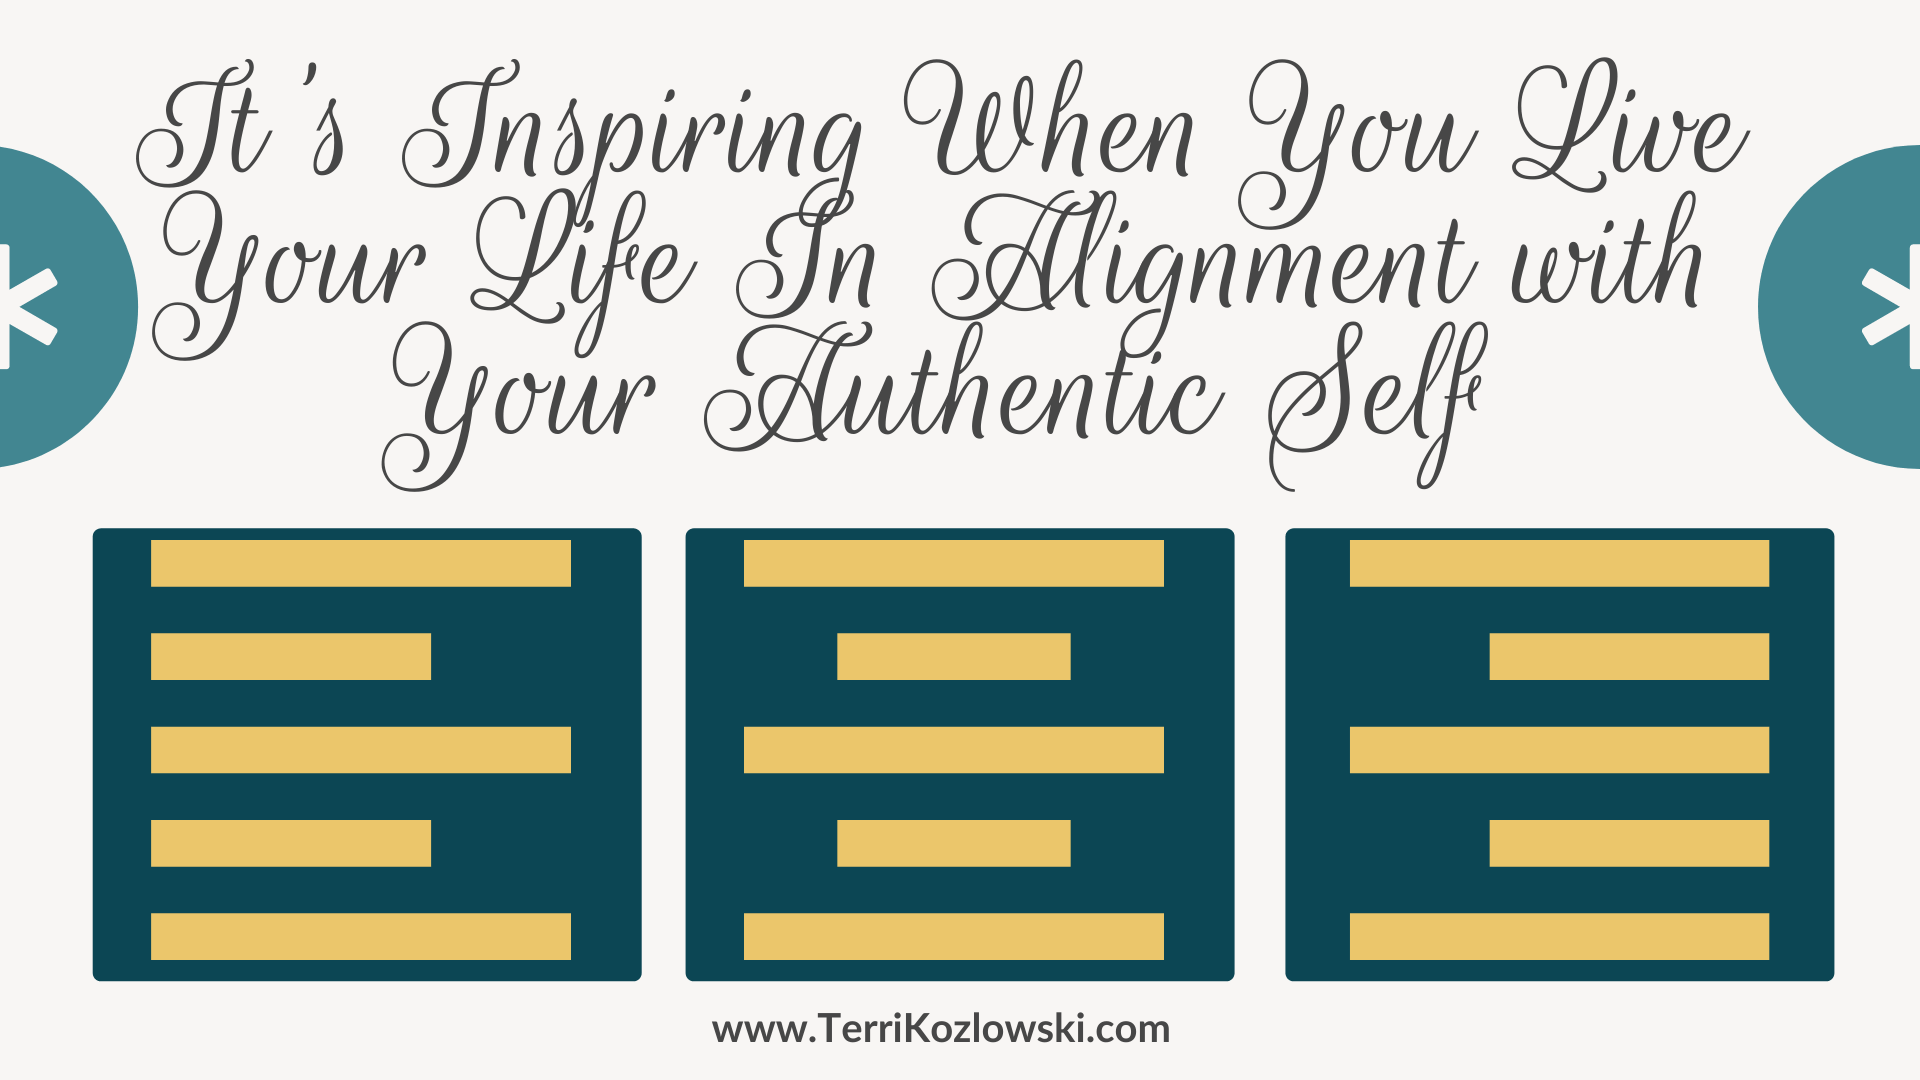 It's Inspiring When You Live Your Life In Alignment with Your Authentic Self